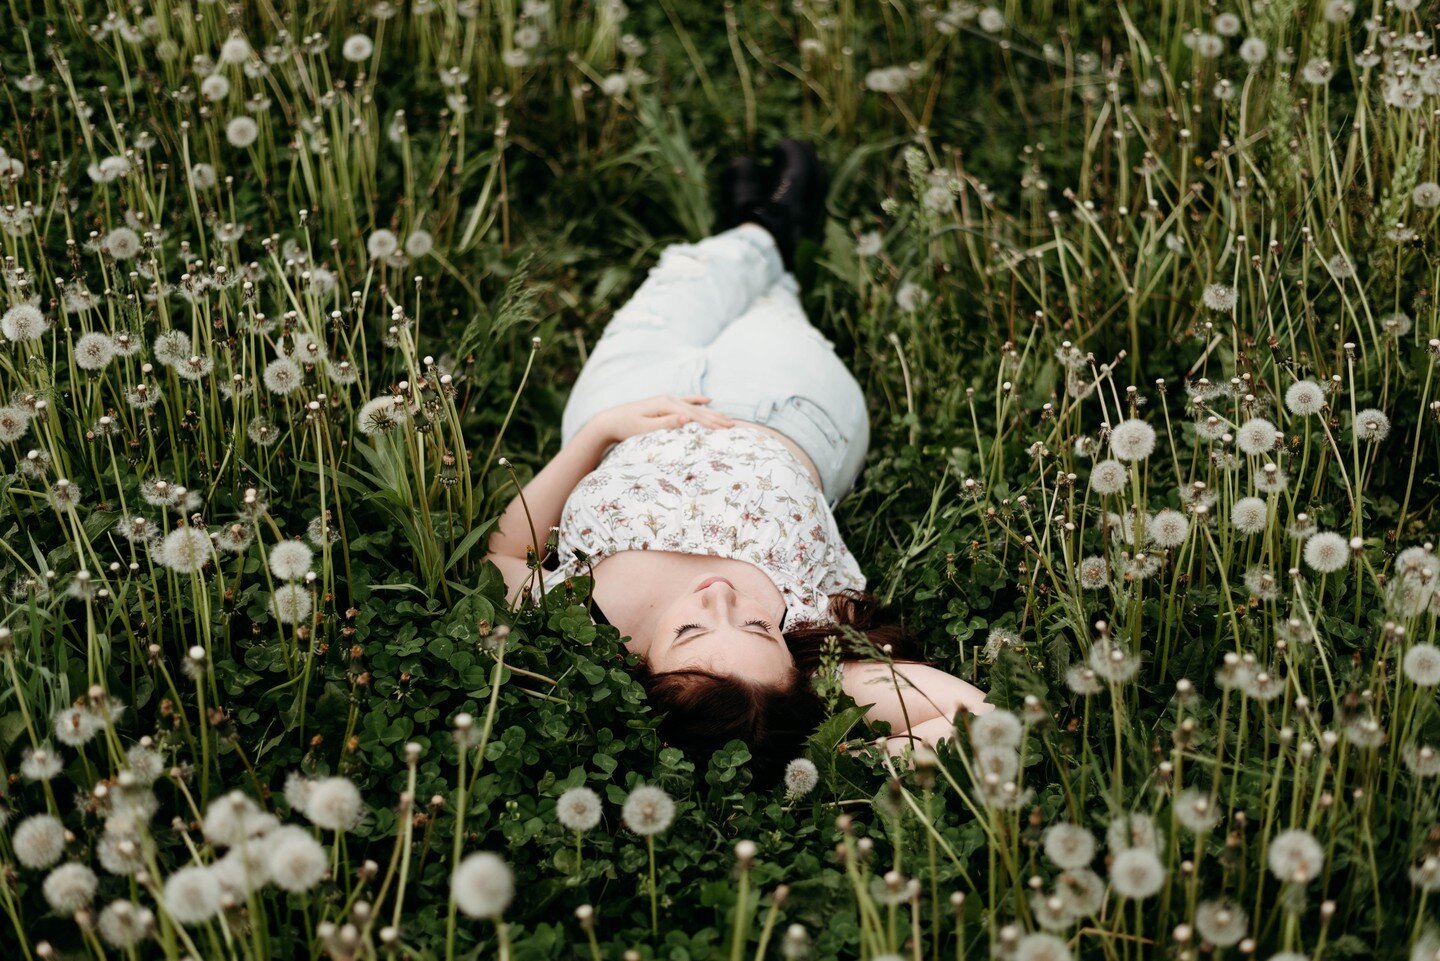 She did look at me like I was a bit insane when I asked her to relax in a field of dead dandelions.